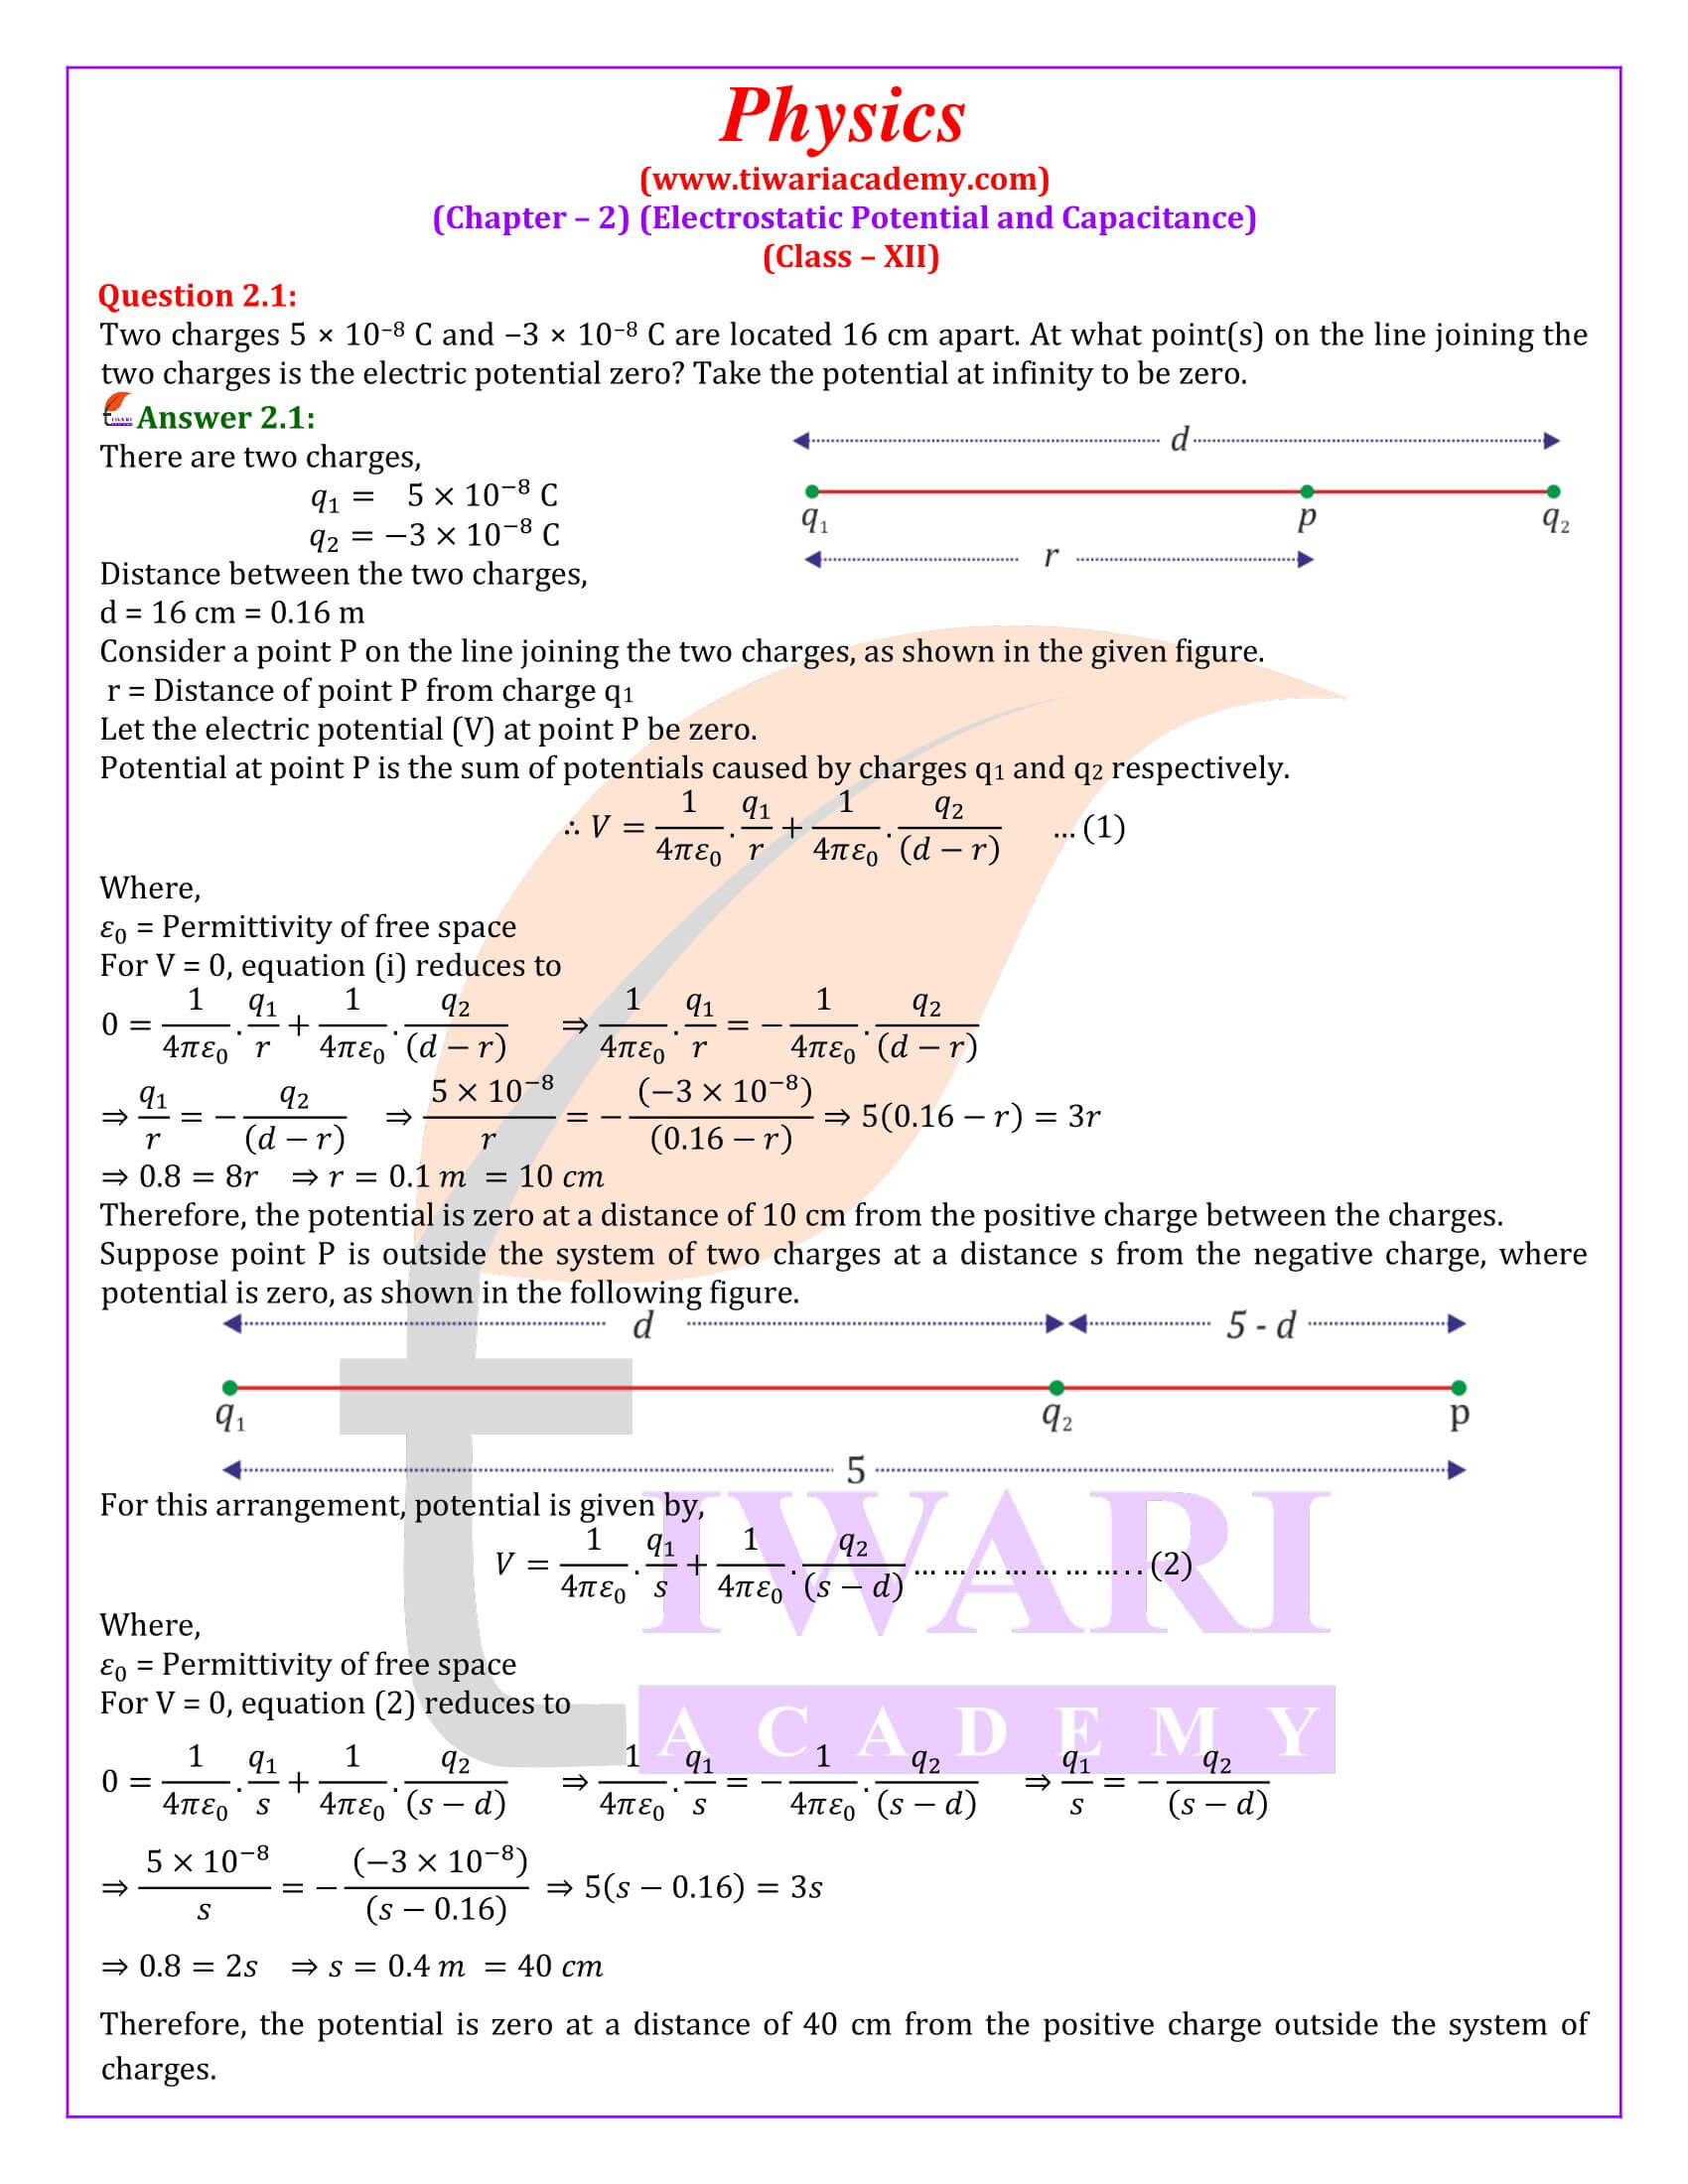 Class 12 Physics Chapter 2 Electrostatic Potential and Capacitance